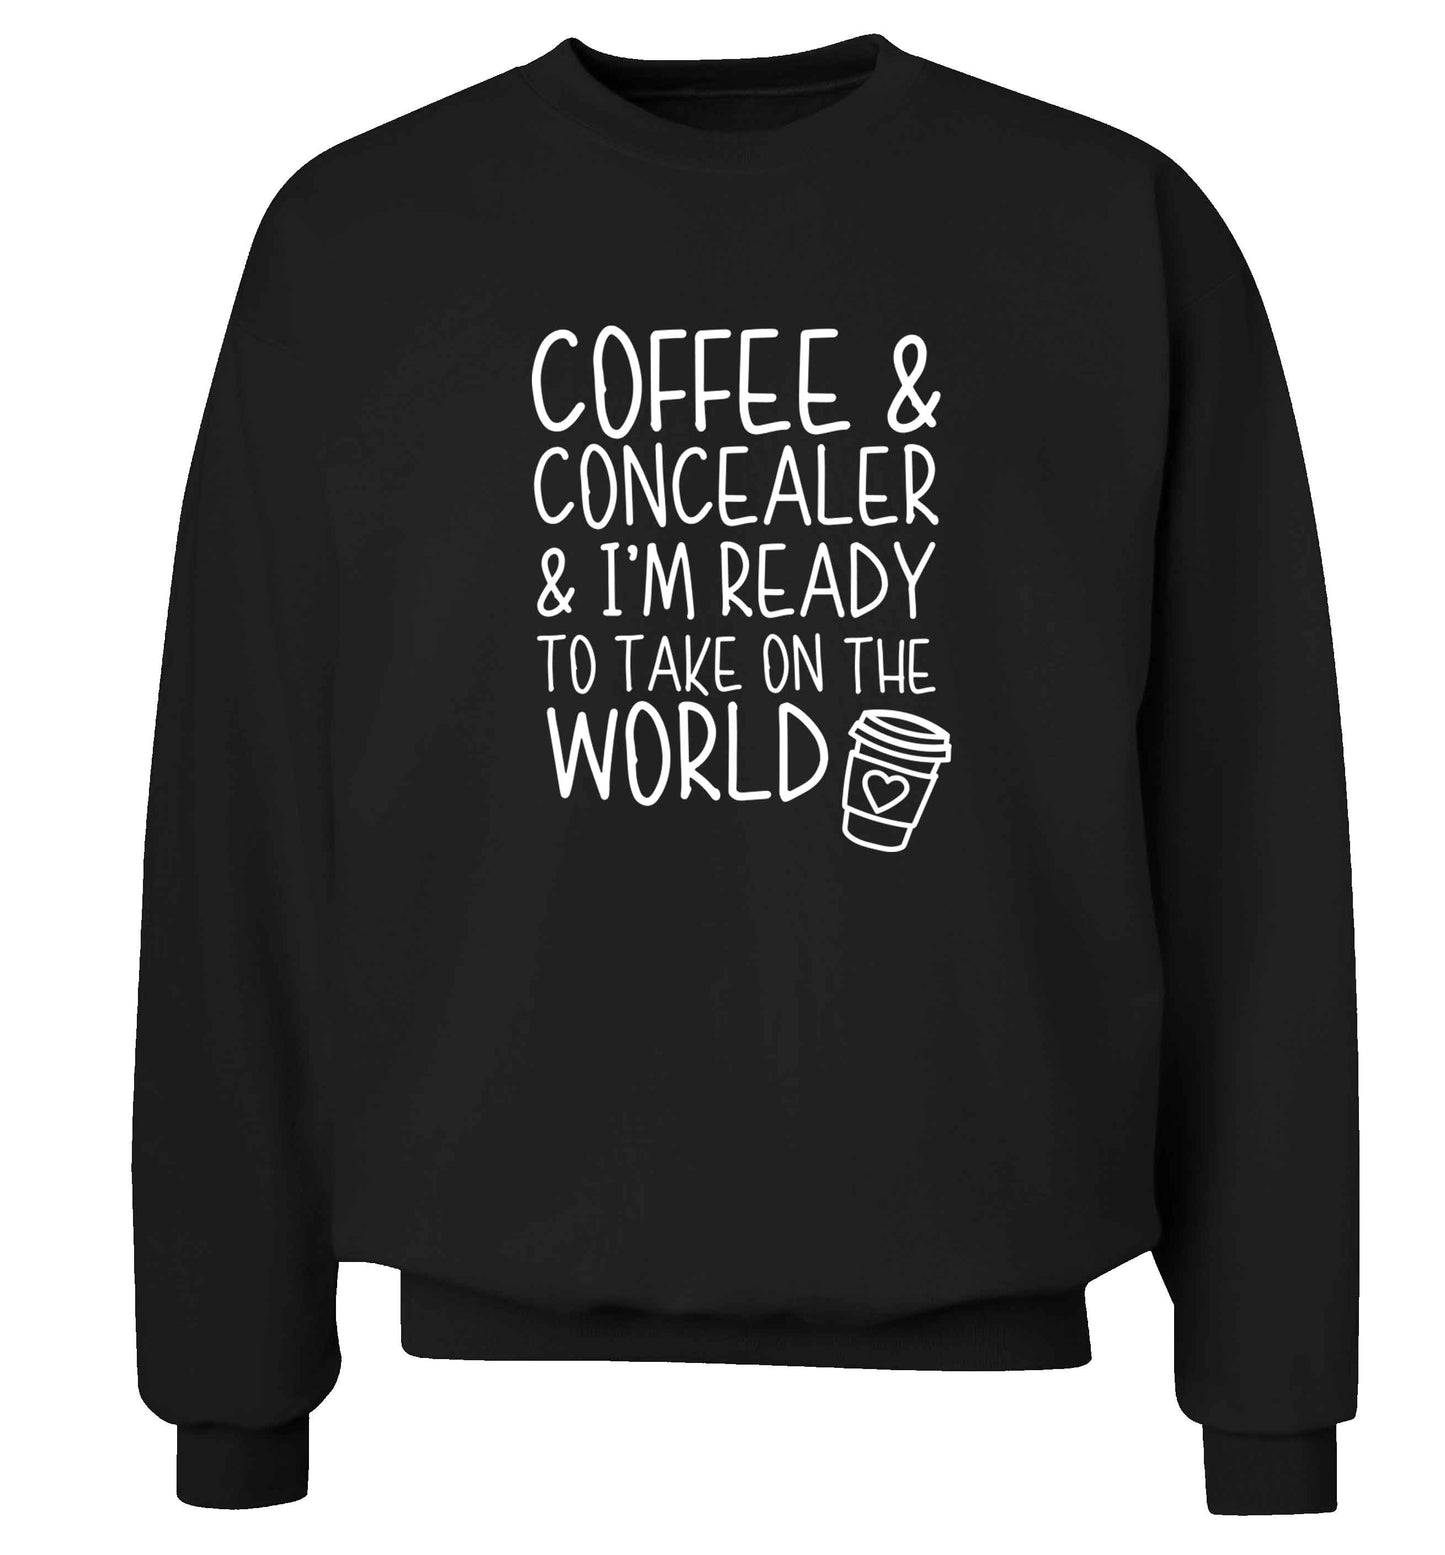 Coffee and concealer and I'm ready to take on the world adult's unisex black sweater 2XL